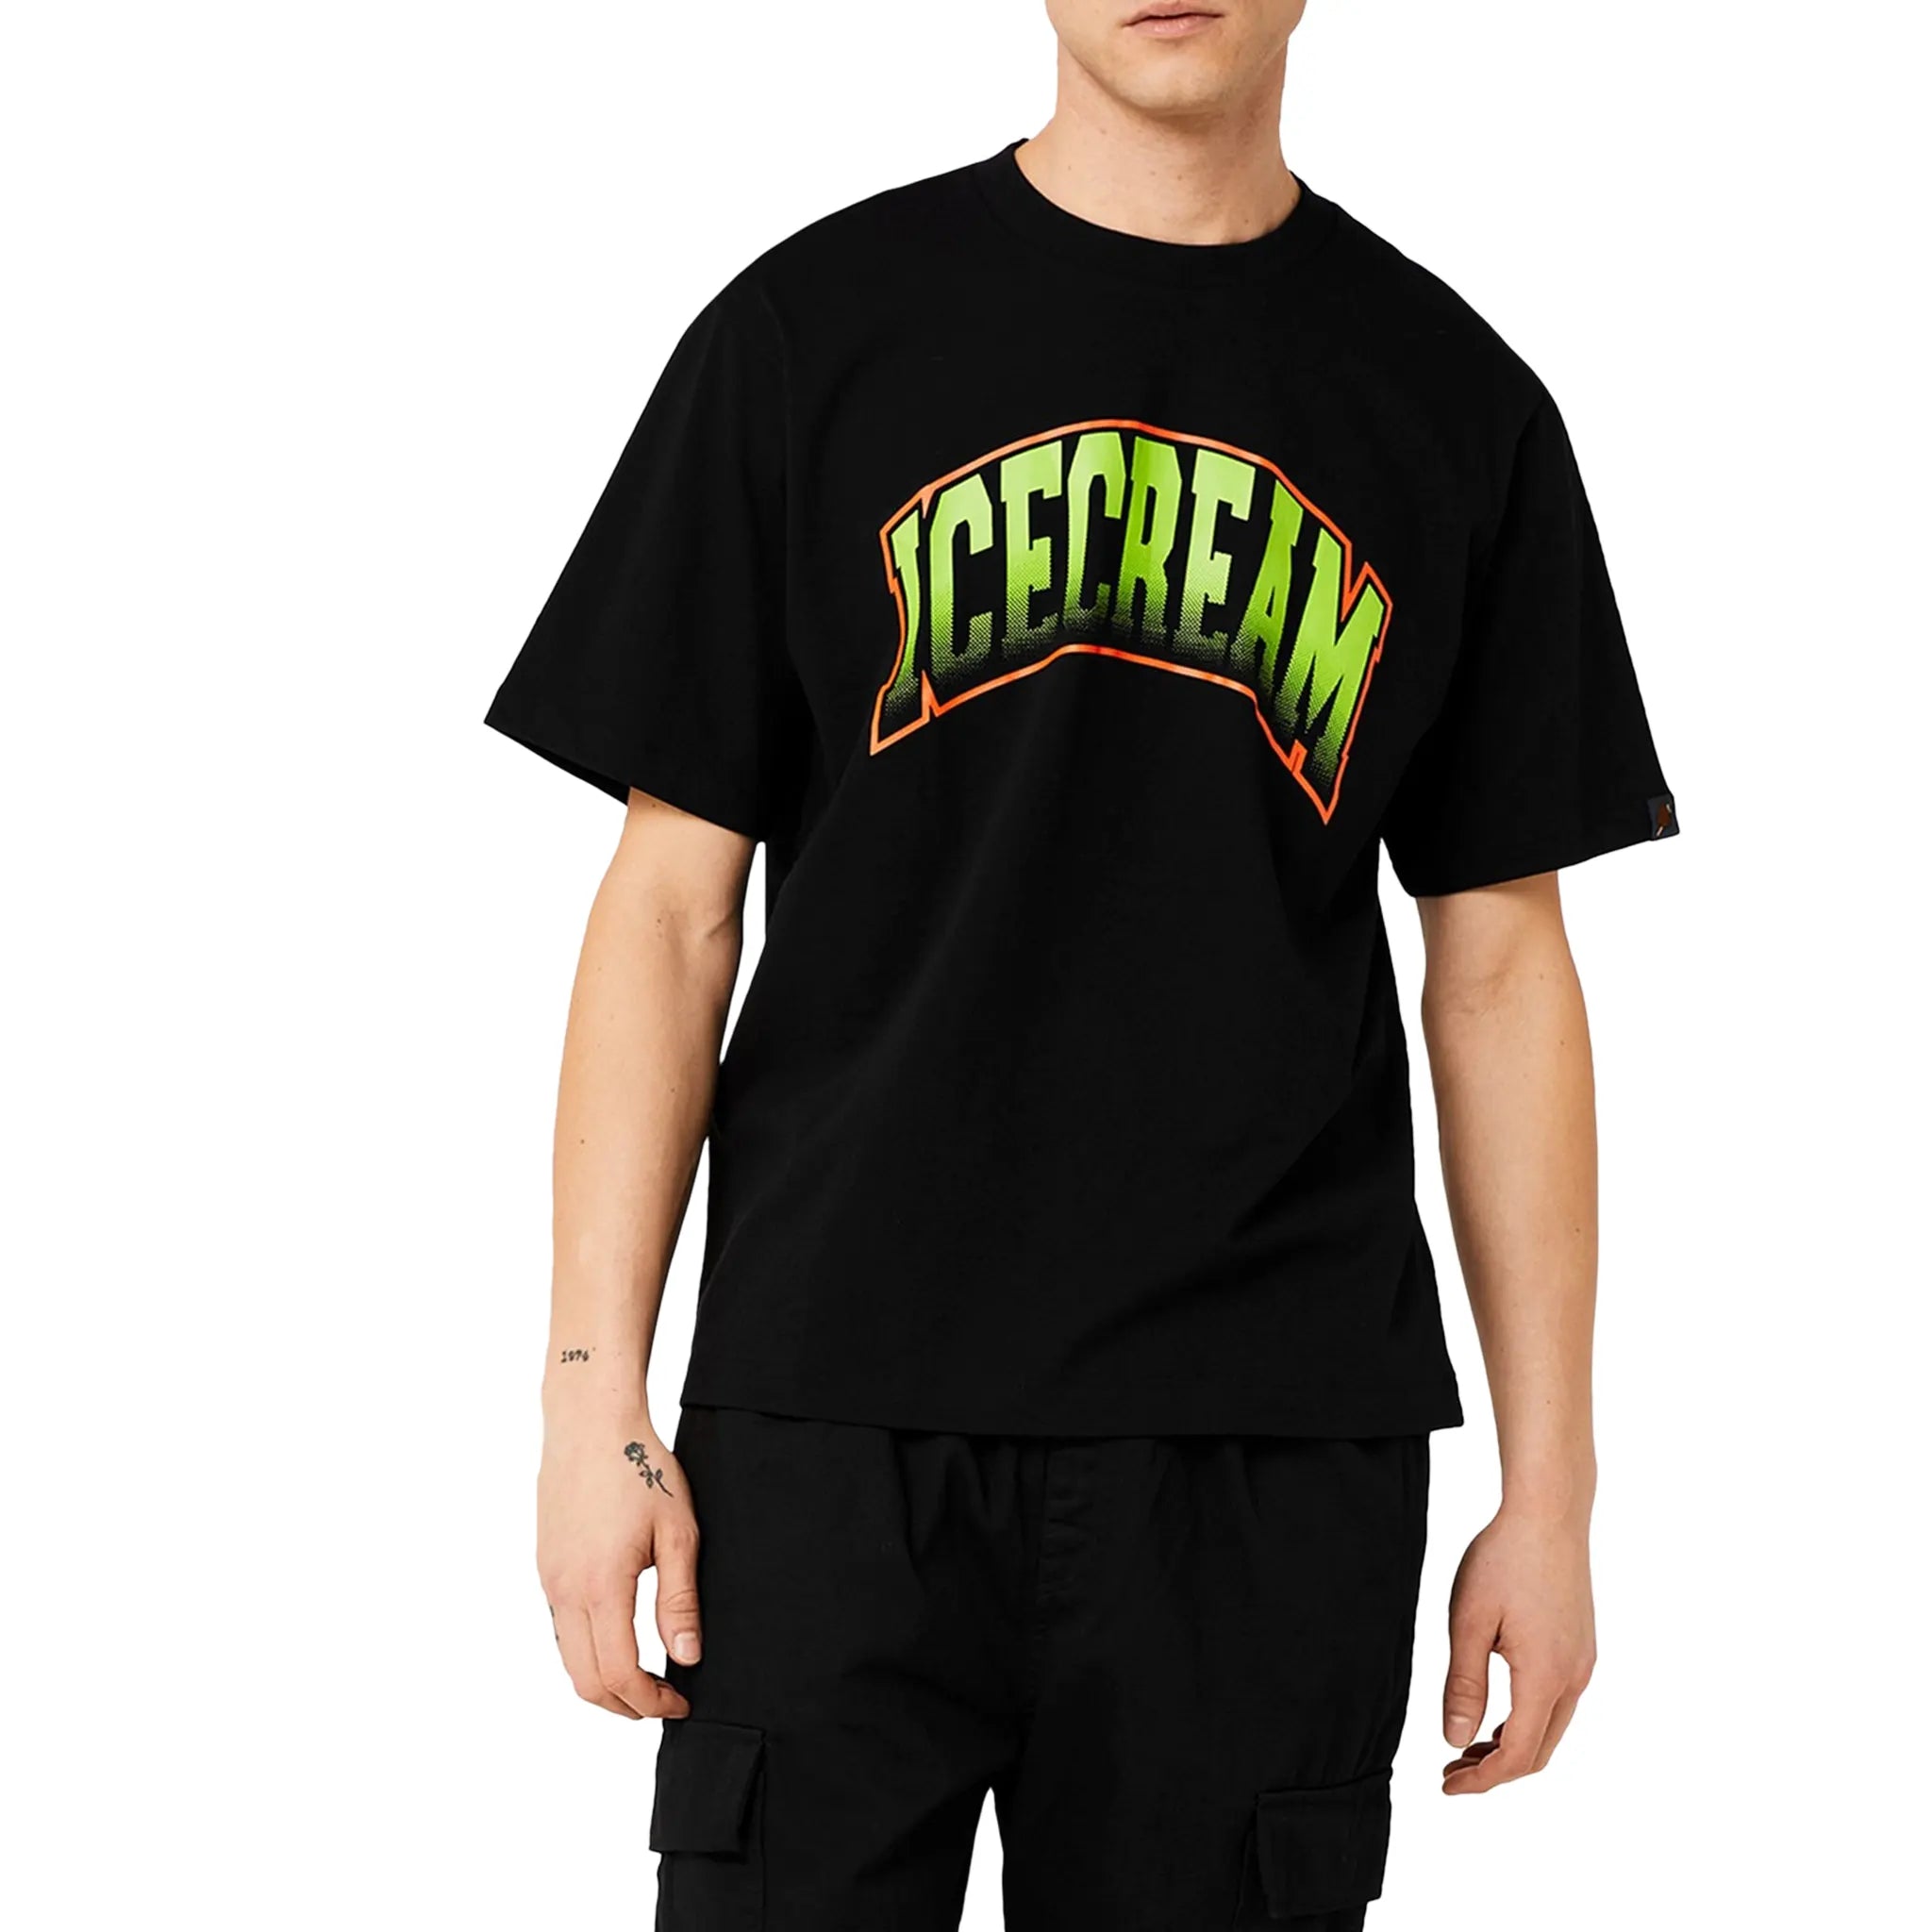 Front Detail view of Icecream IC College Black T Shirt ic23436-blk